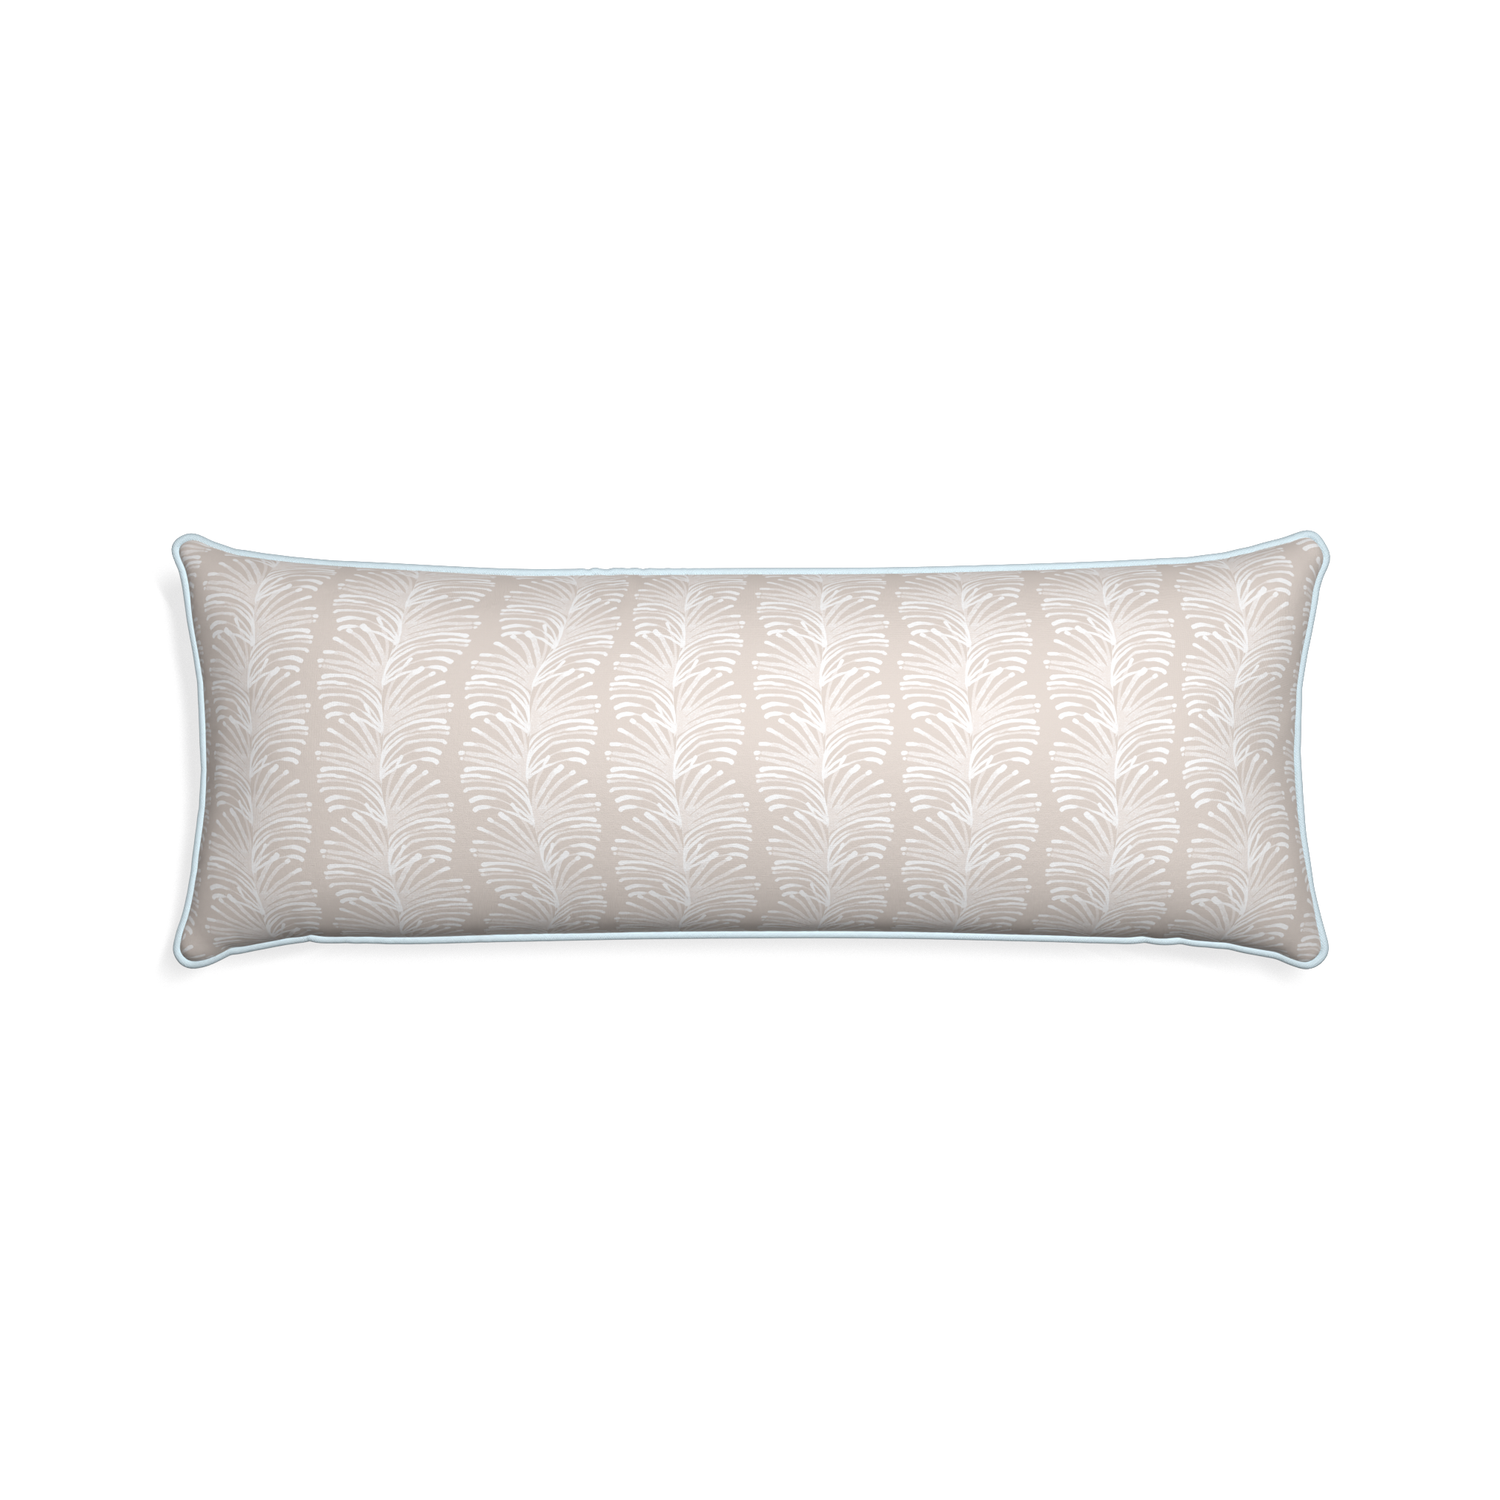 Xl-lumbar emma sand custom pillow with powder piping on white background